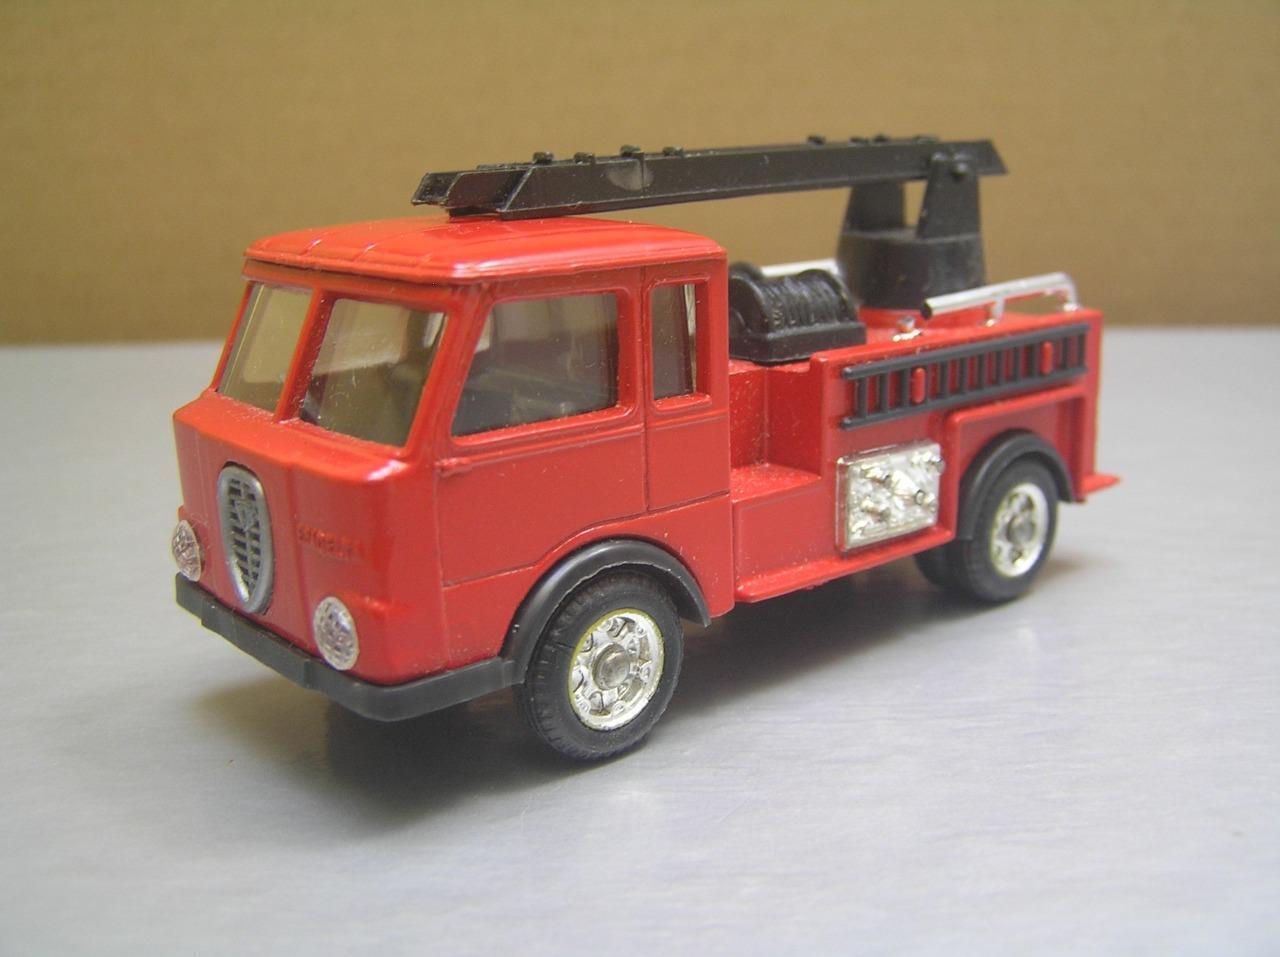 Politoys Penny 0/117 Lancia Esadelta Fire Truck made in Italy NM+ Condition